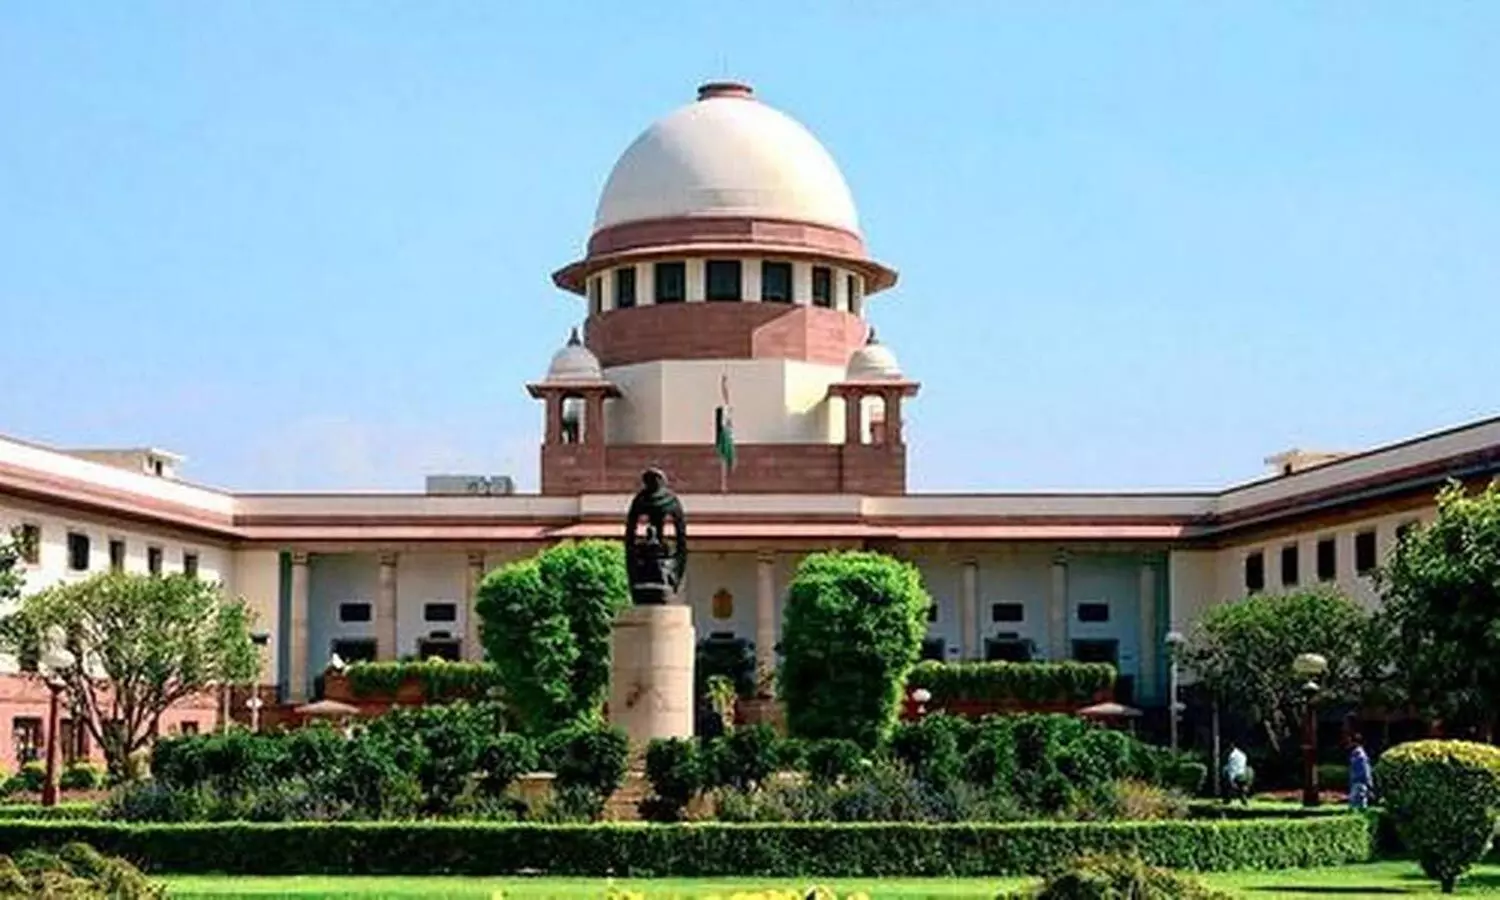 Rs 1000 crore pharma doctor nexus: Supreme Court takes cognizance, to decide on making UCPMP mandatory